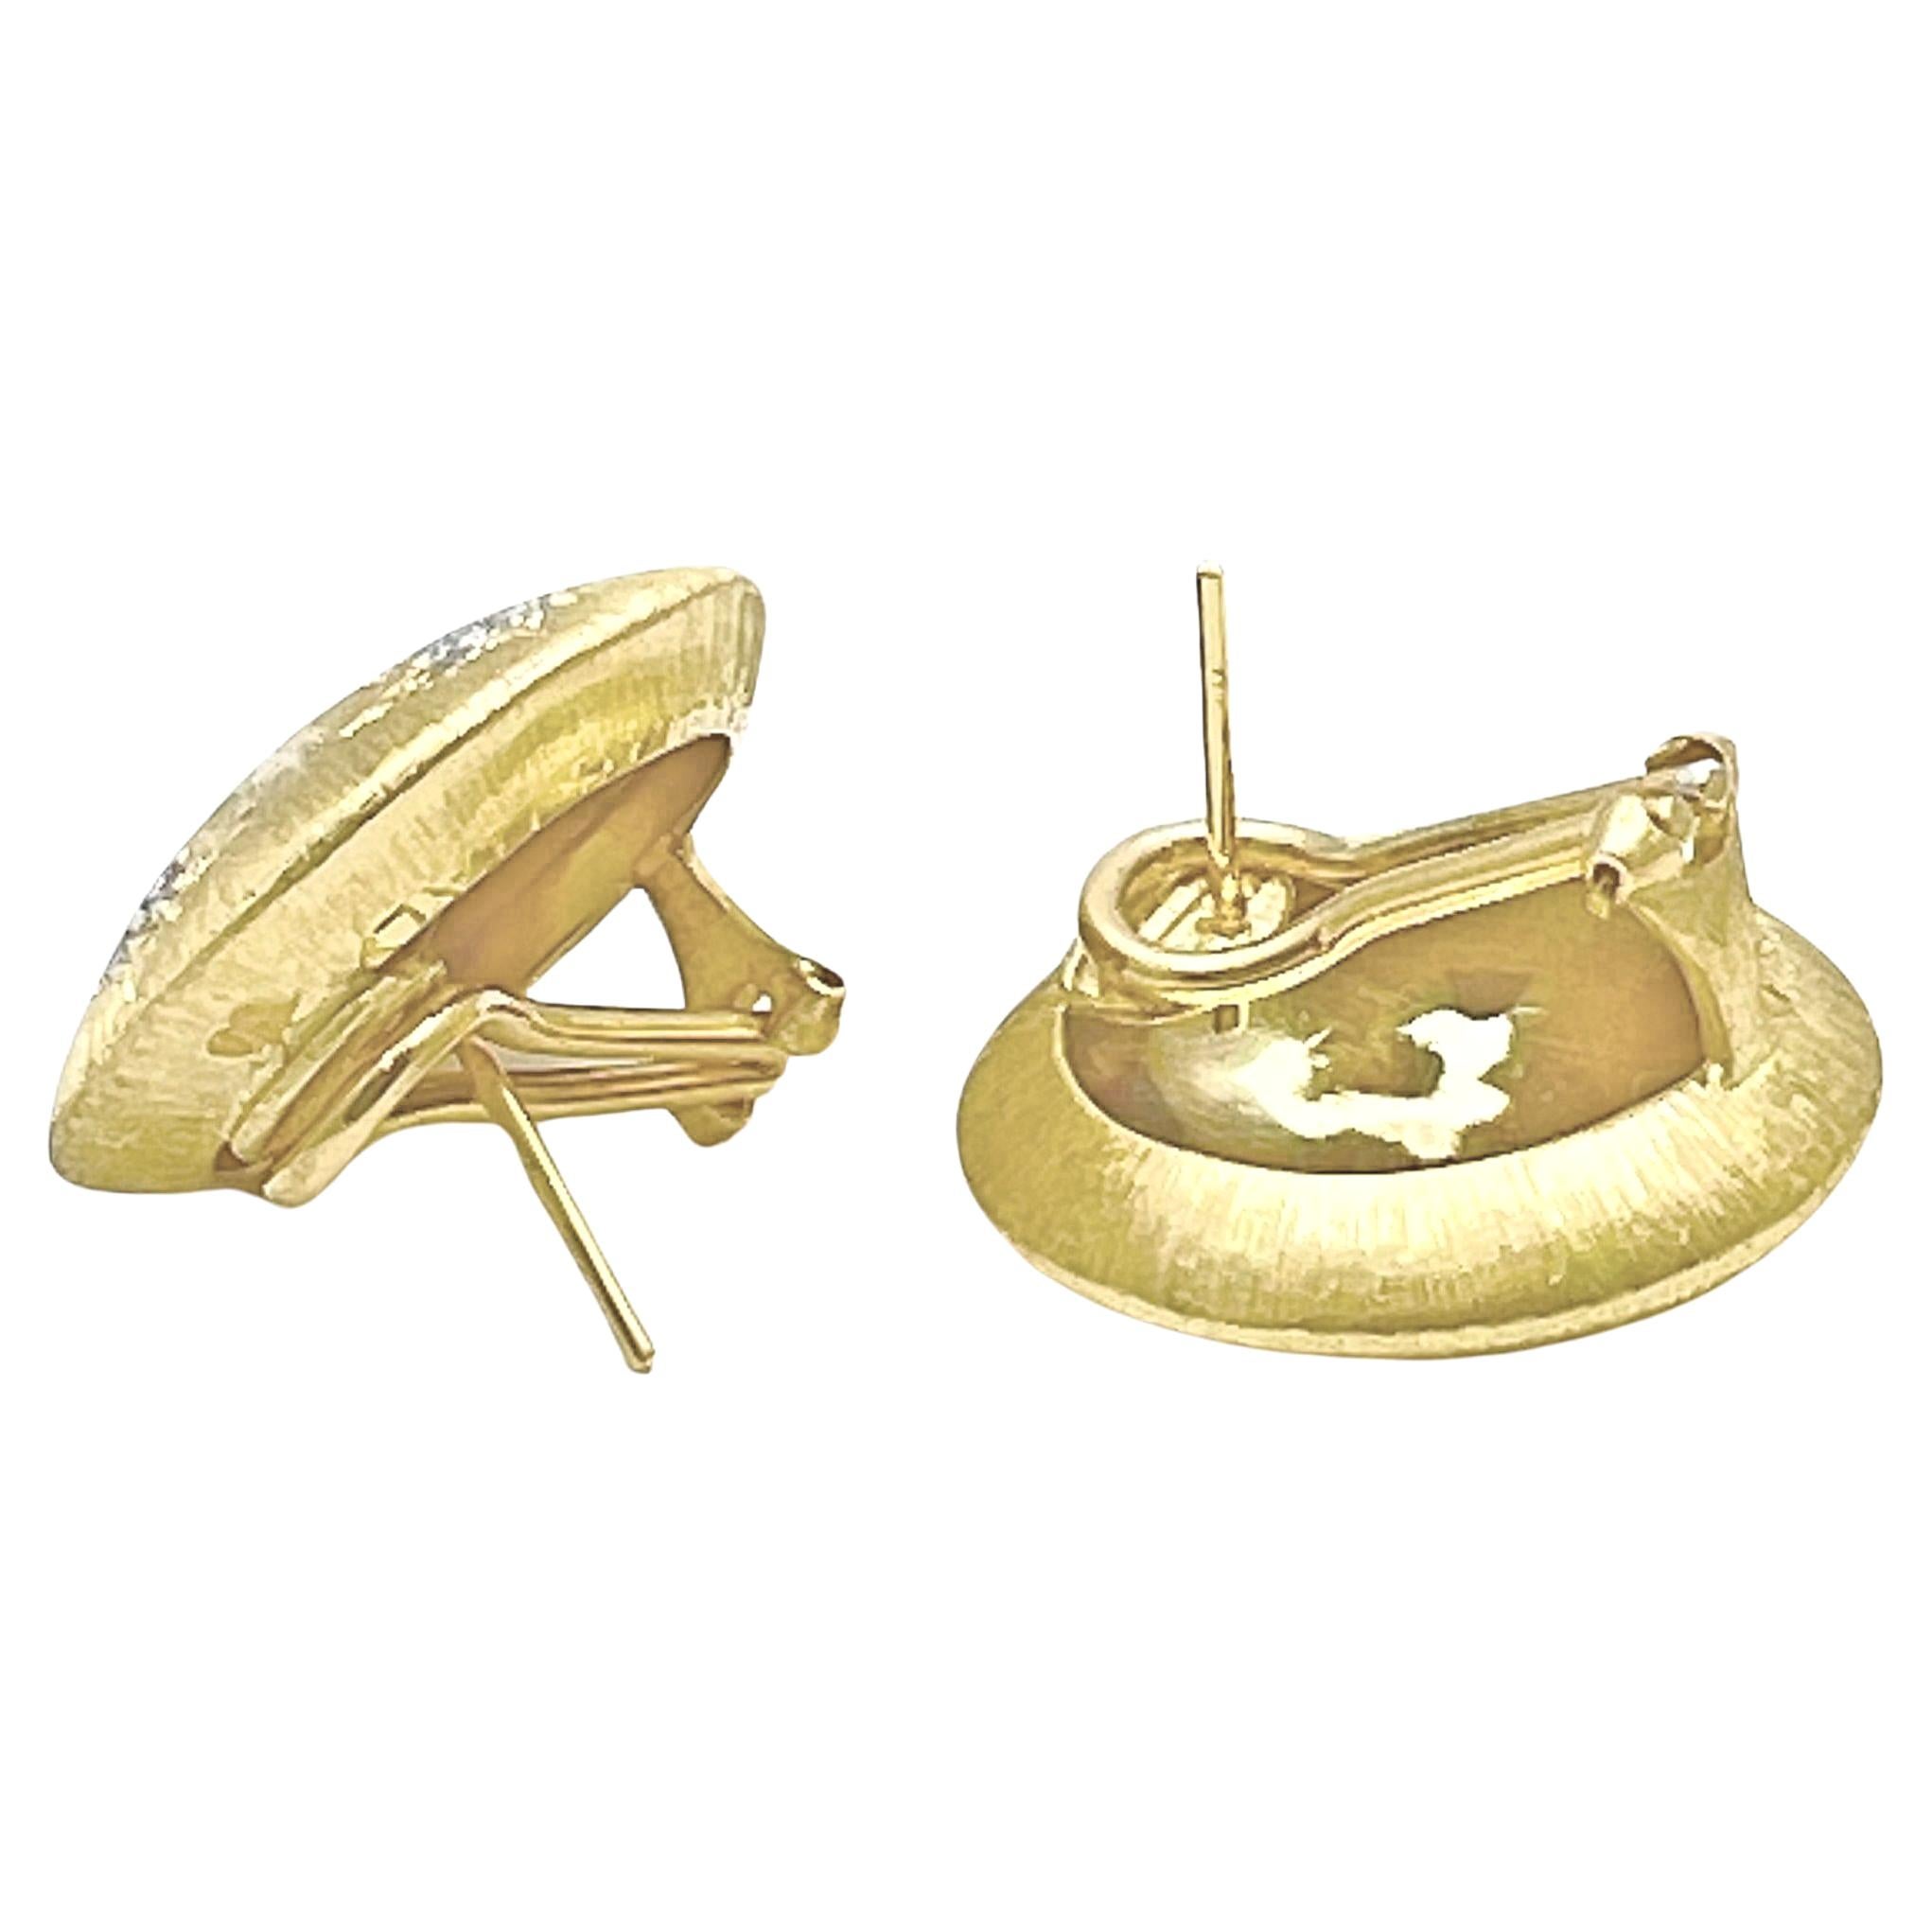 Buccellati 18k Gold Geminato Button Earrings In Excellent Condition For Sale In Palm Beach, FL